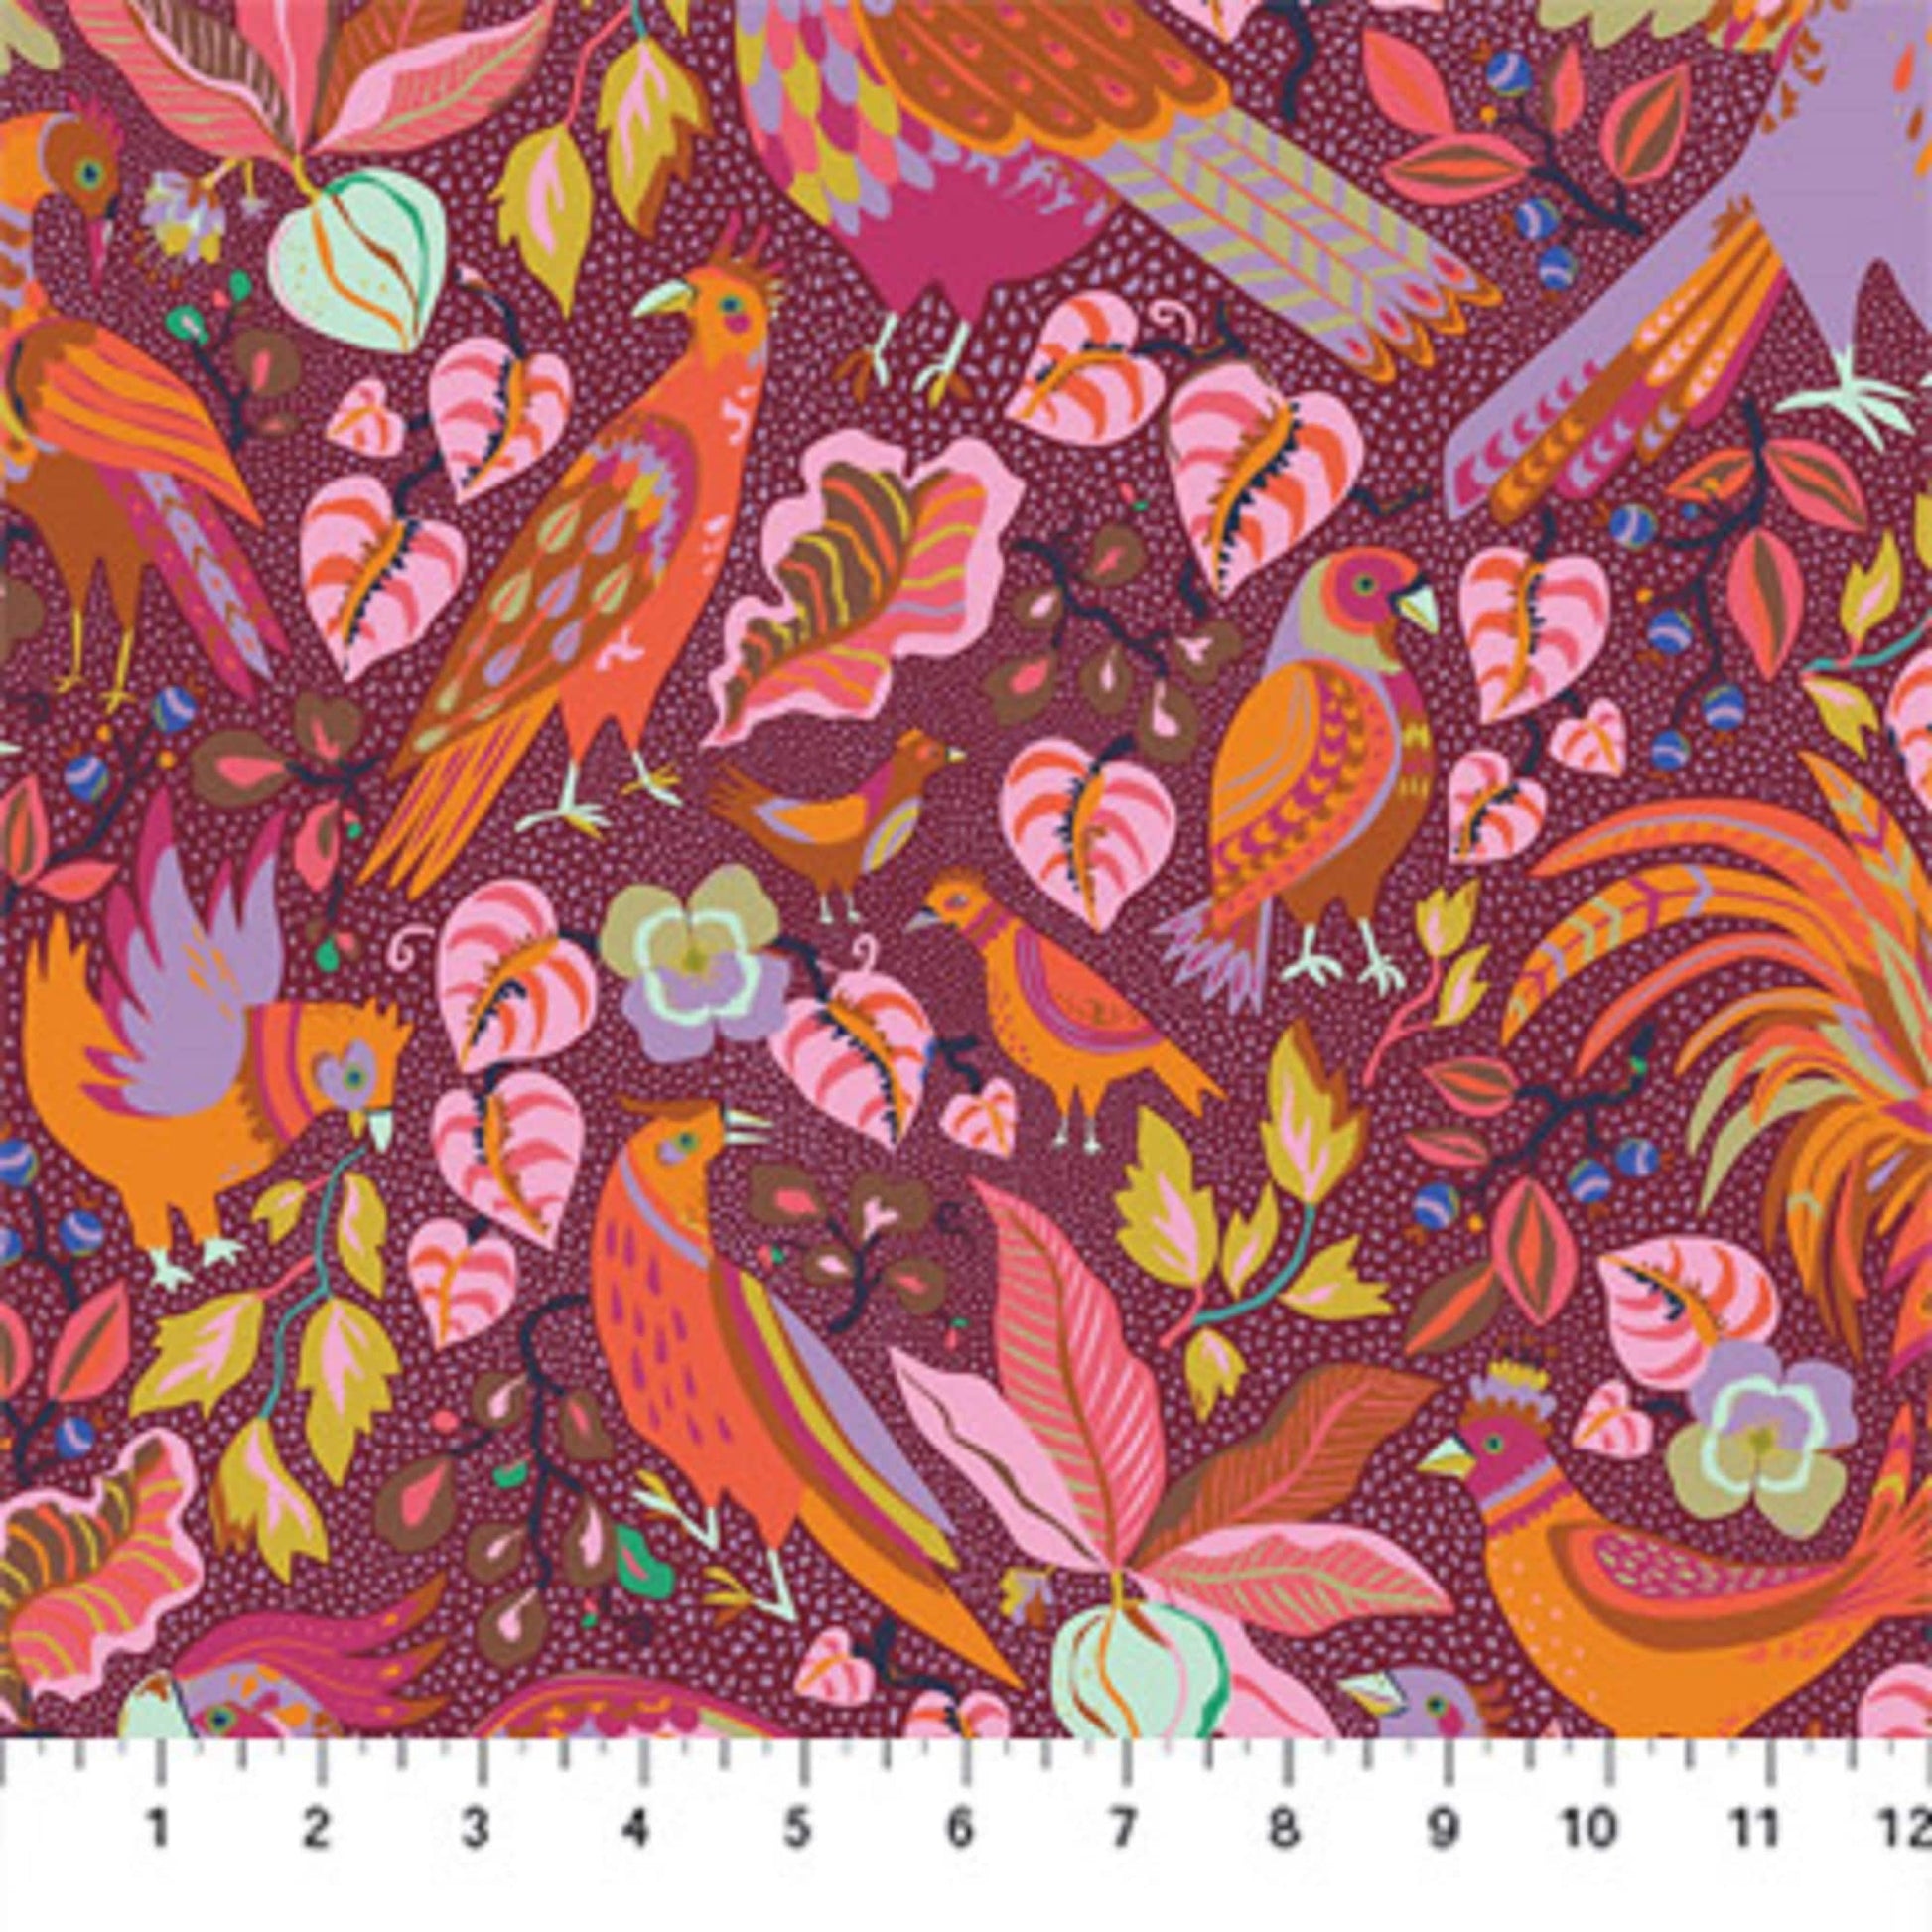 Feathered Friends Chorus Swatch Book Kathy Doughty Figo Fabrics 100% Quilters Cotton 90722 56 Fabric Fetish